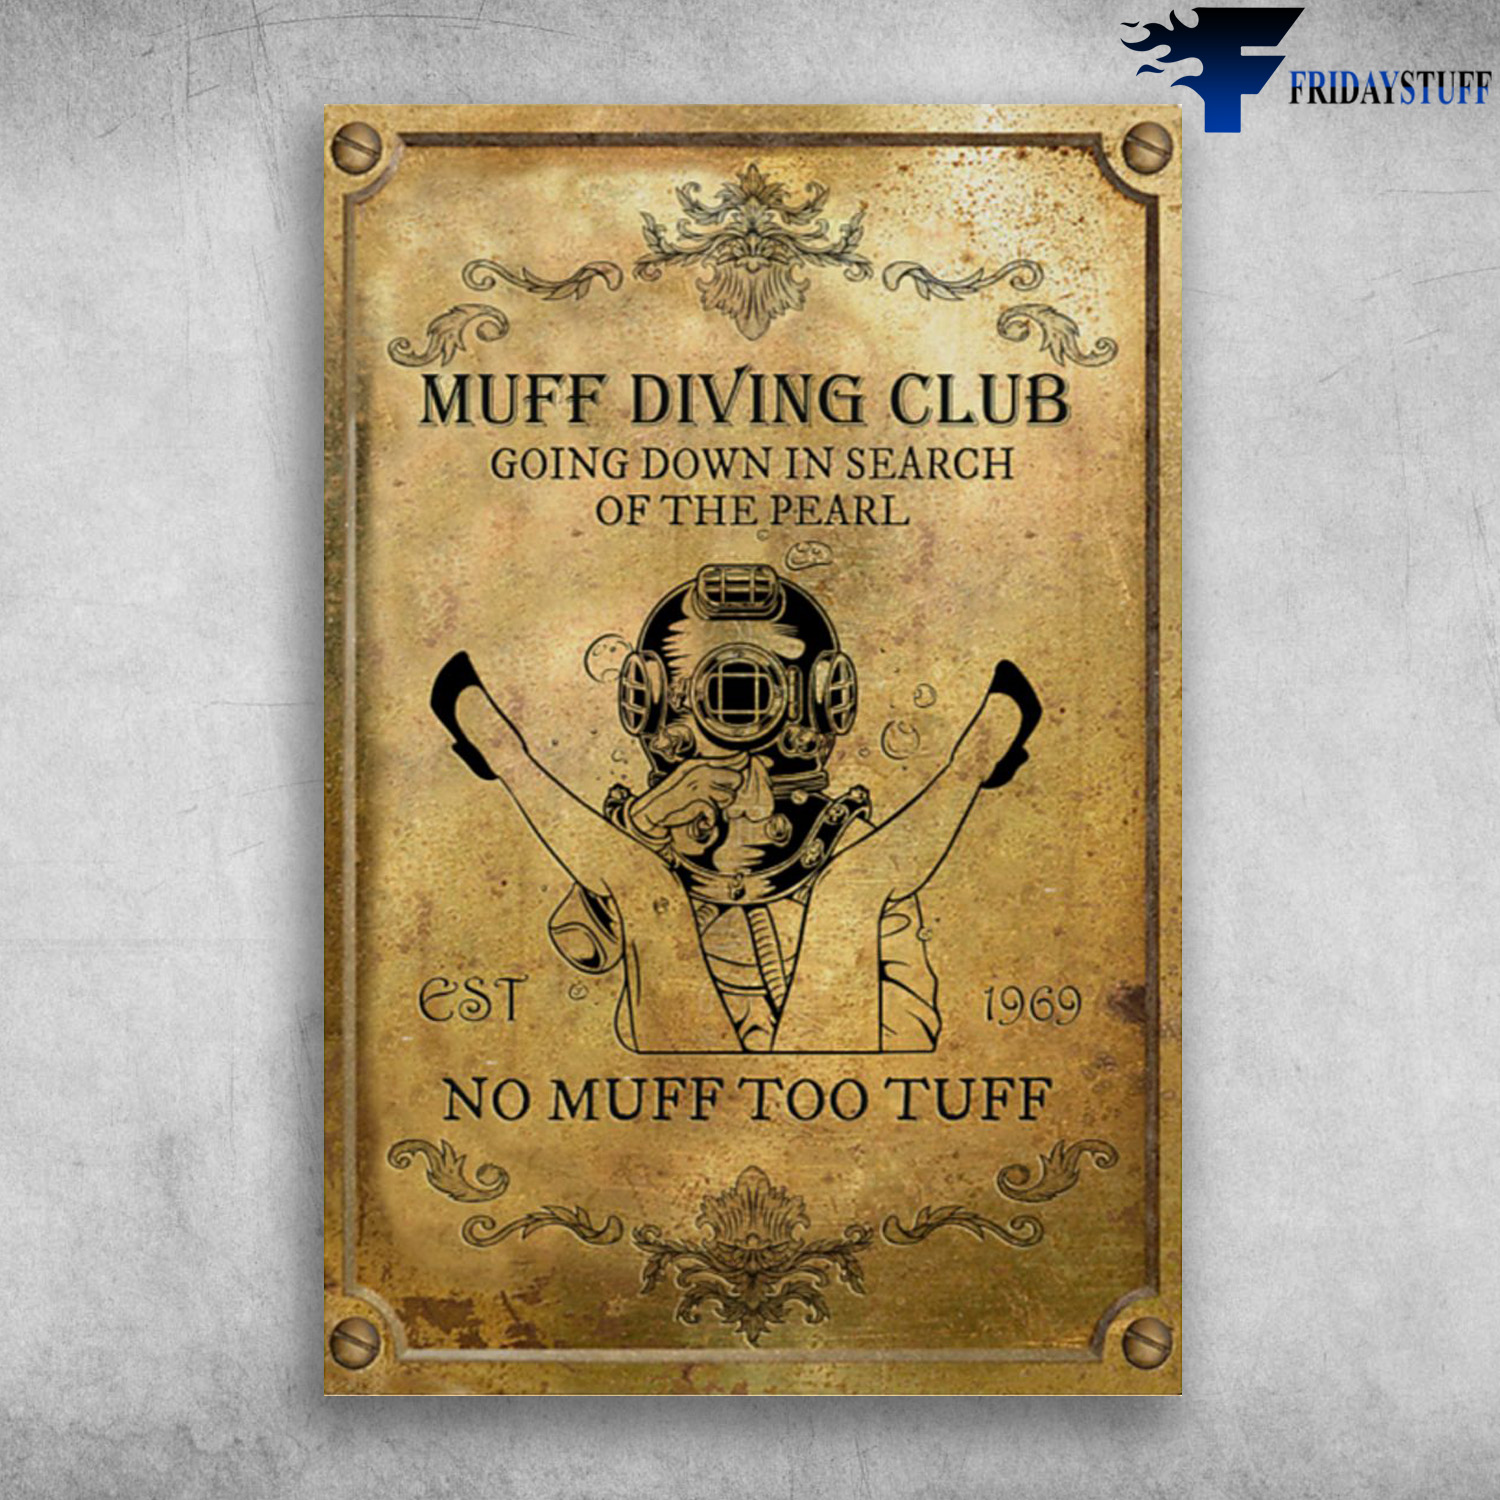 Muff Diving Club - Going Down In Search Of The Pearl, Est 1969, Mo Muff Too Tuff